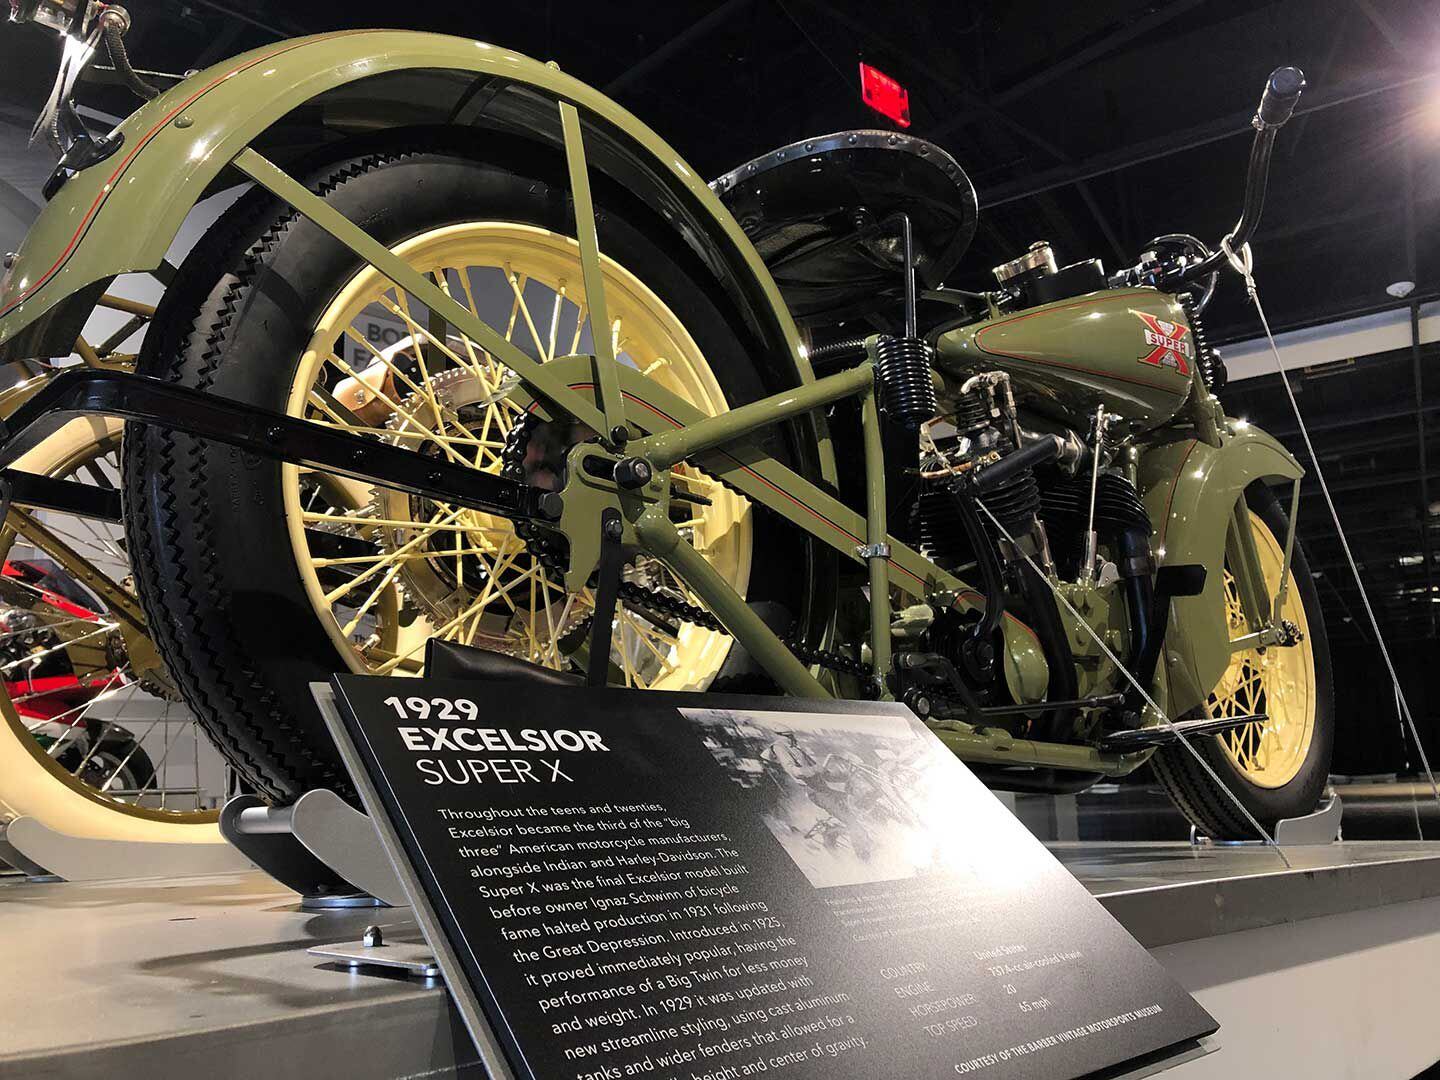 Excelsior-Henderson’s popular 1929 Super X V-twin was the final model from the big American brand before it closed its doors in 1931.